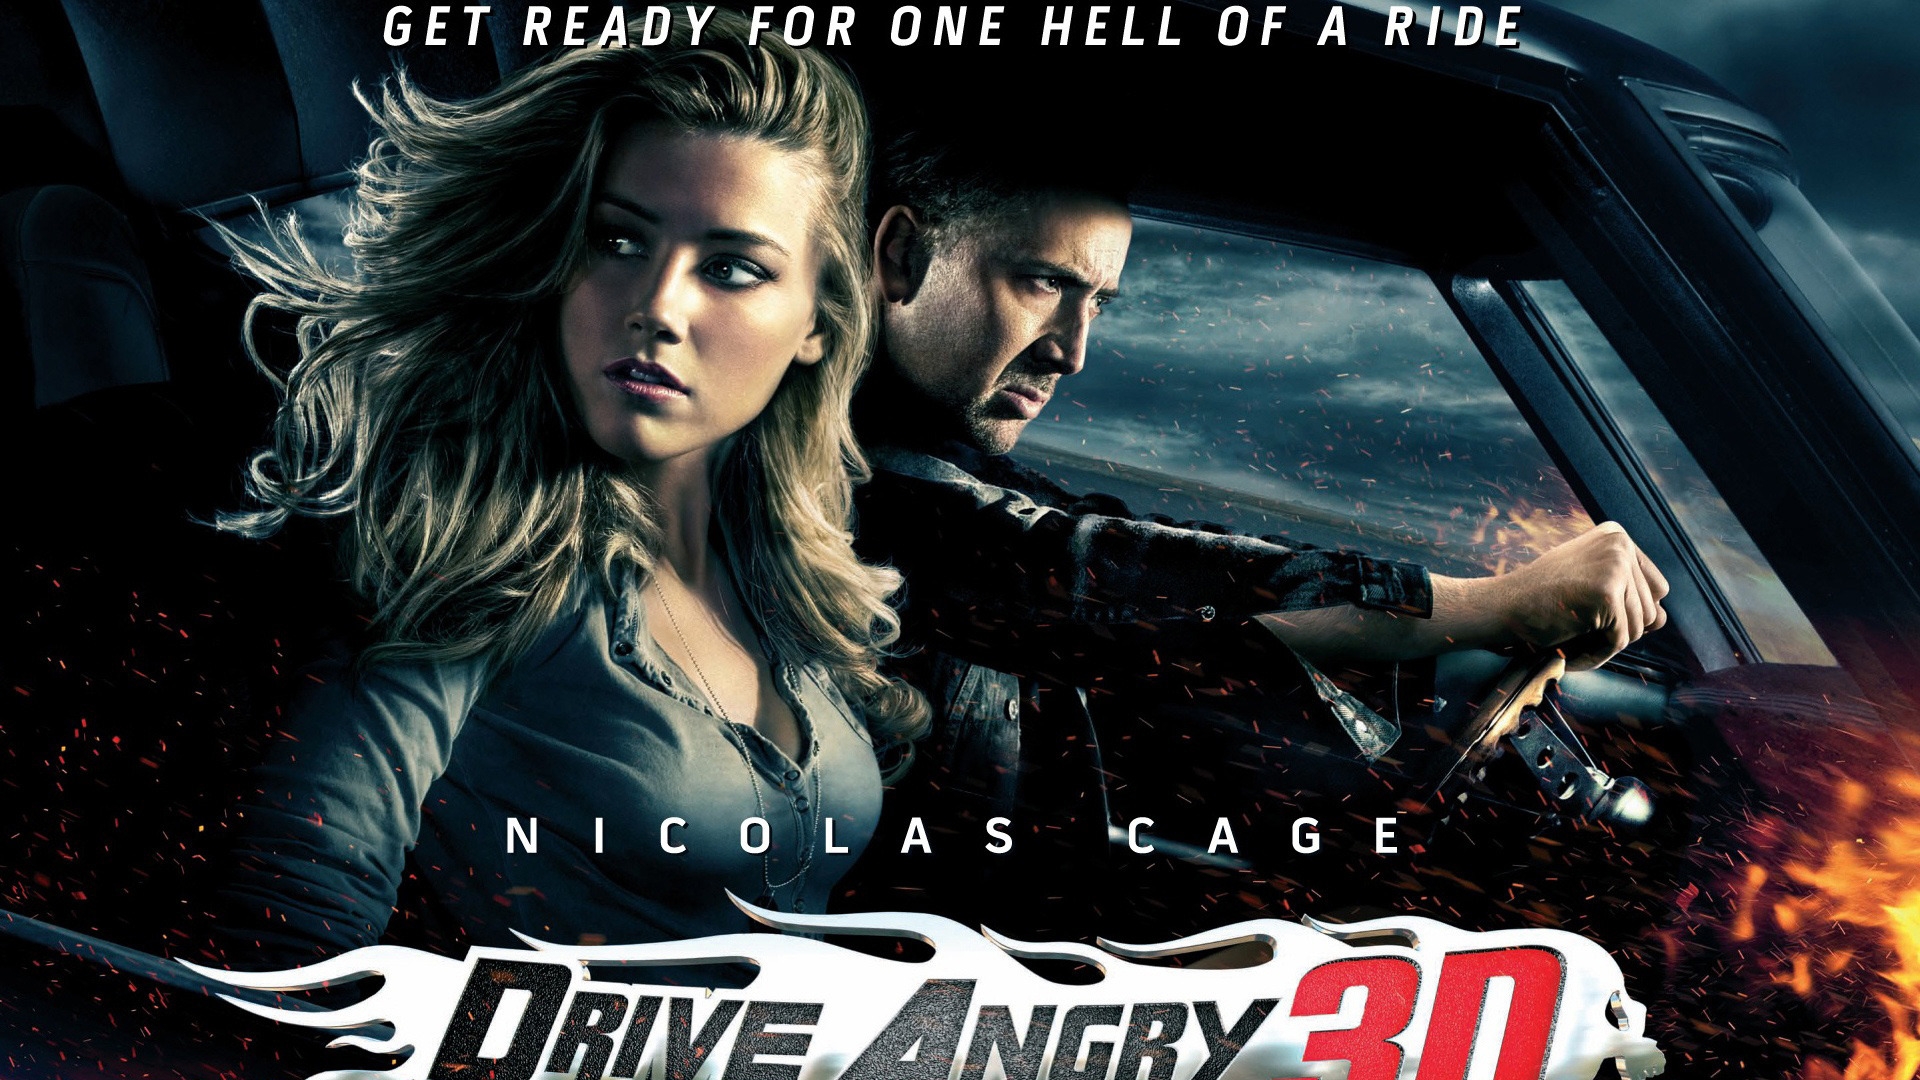 Drive Angry 3D for 1920 x 1080 HDTV 1080p resolution